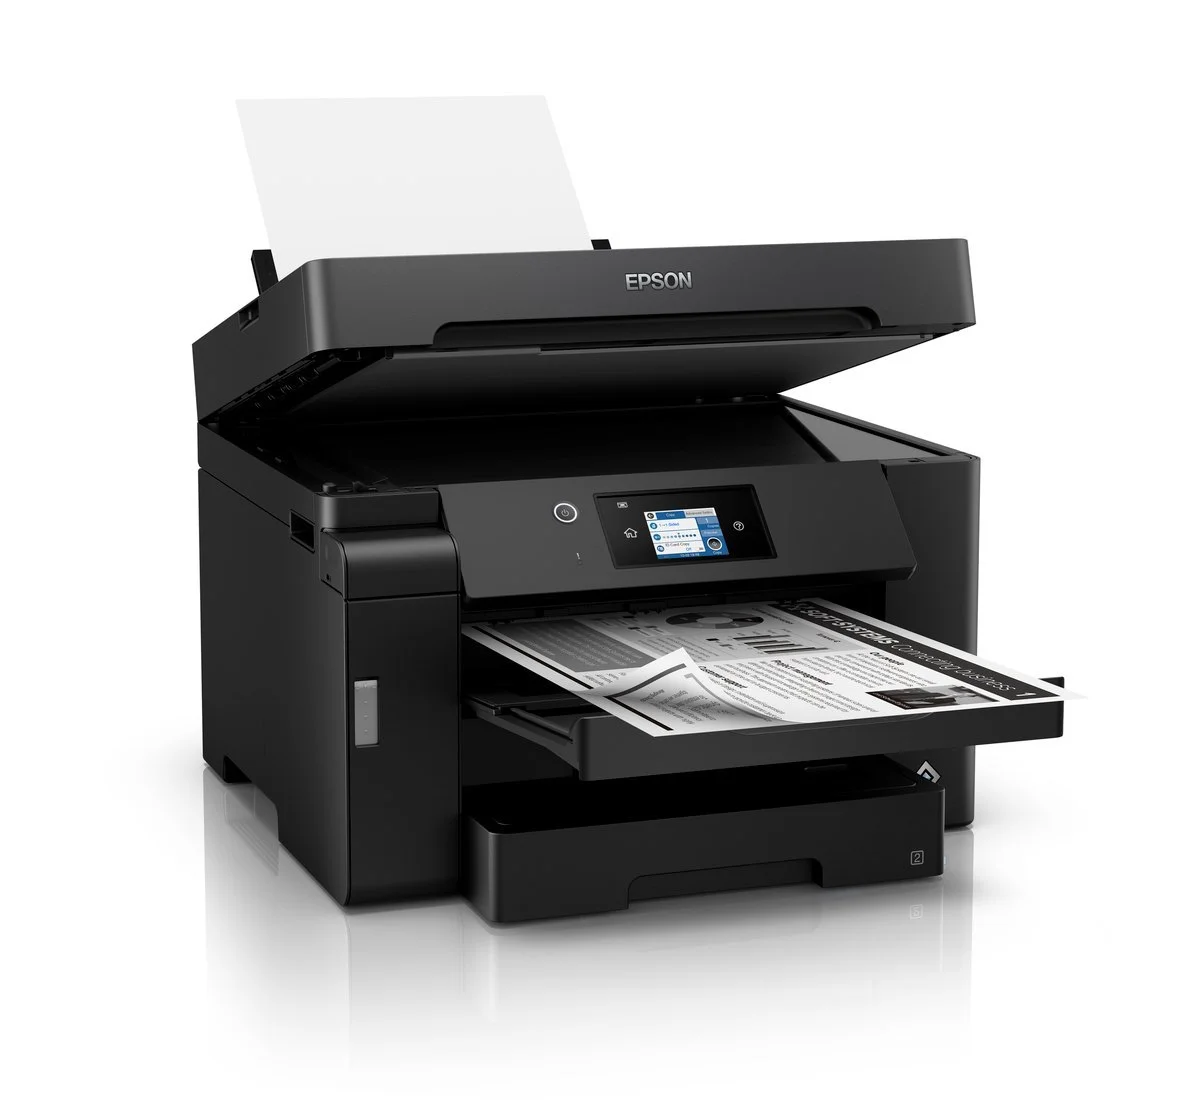 Epson Ecotank L15150 A3 Wifi Duplex All In One Ink Tank Printer Print Speed Of Up 25.0 Ipm/Prints Up To A3+ [For Simplex]/Automatic Duplex Printing /Ultra-High Page Yield Of 7,500 Pages [Black] Na 6,000 Pages [Colour] Wi-Fi,Wi-Fi Direct, Na Ethernet